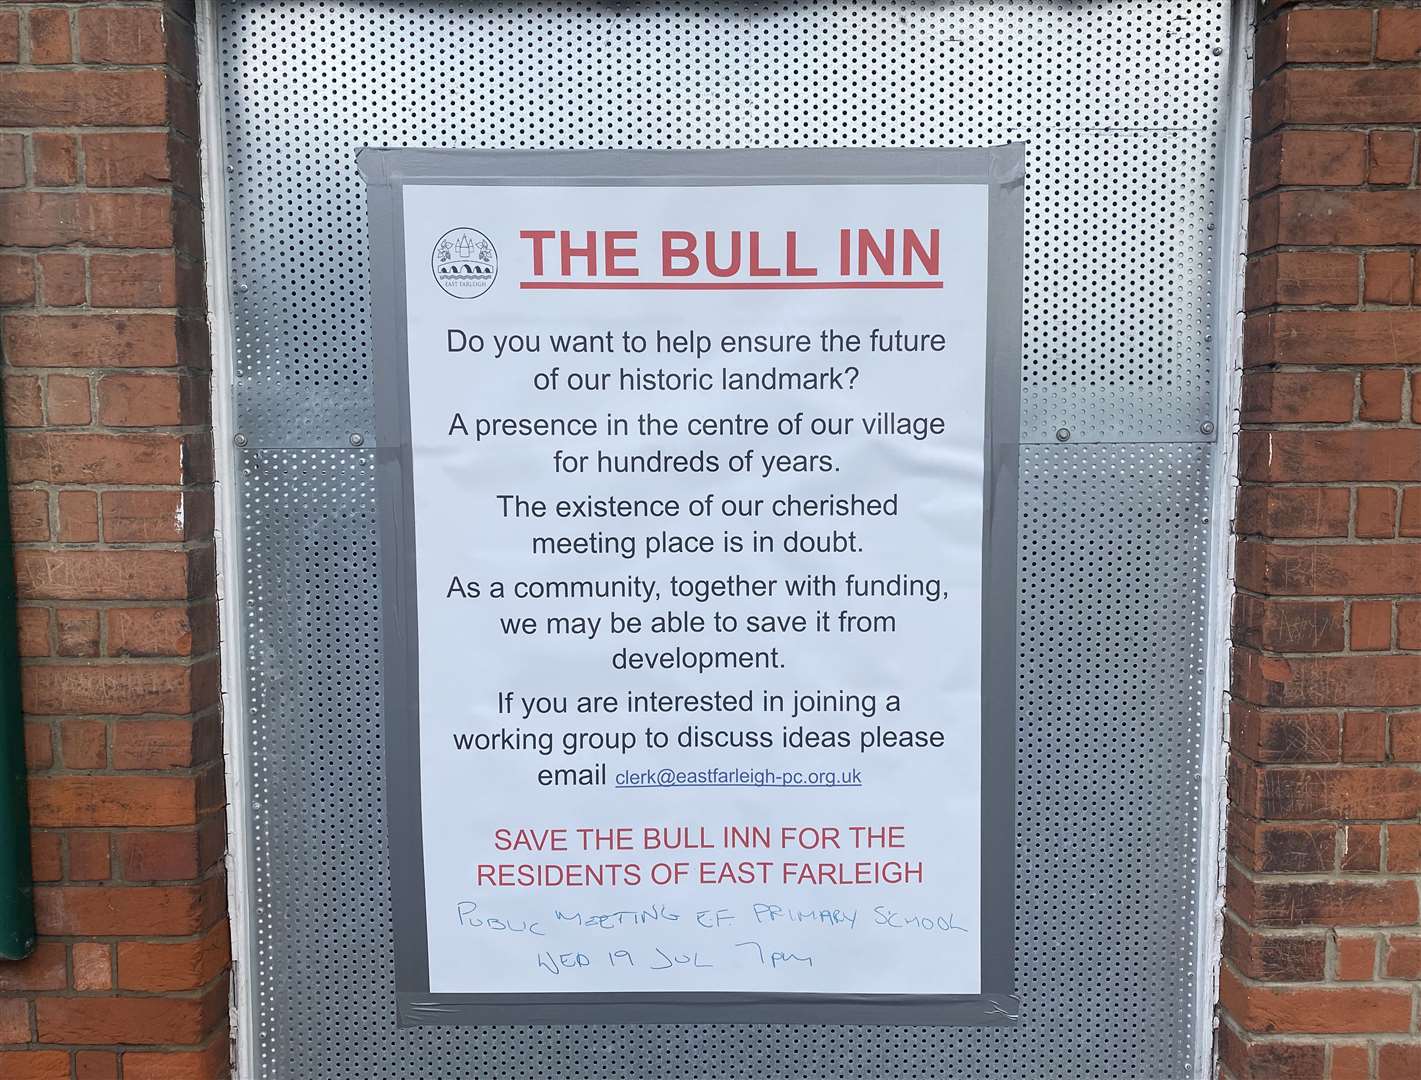 A sign appealing for people interested in the pub put up by East Farleigh Parish Council